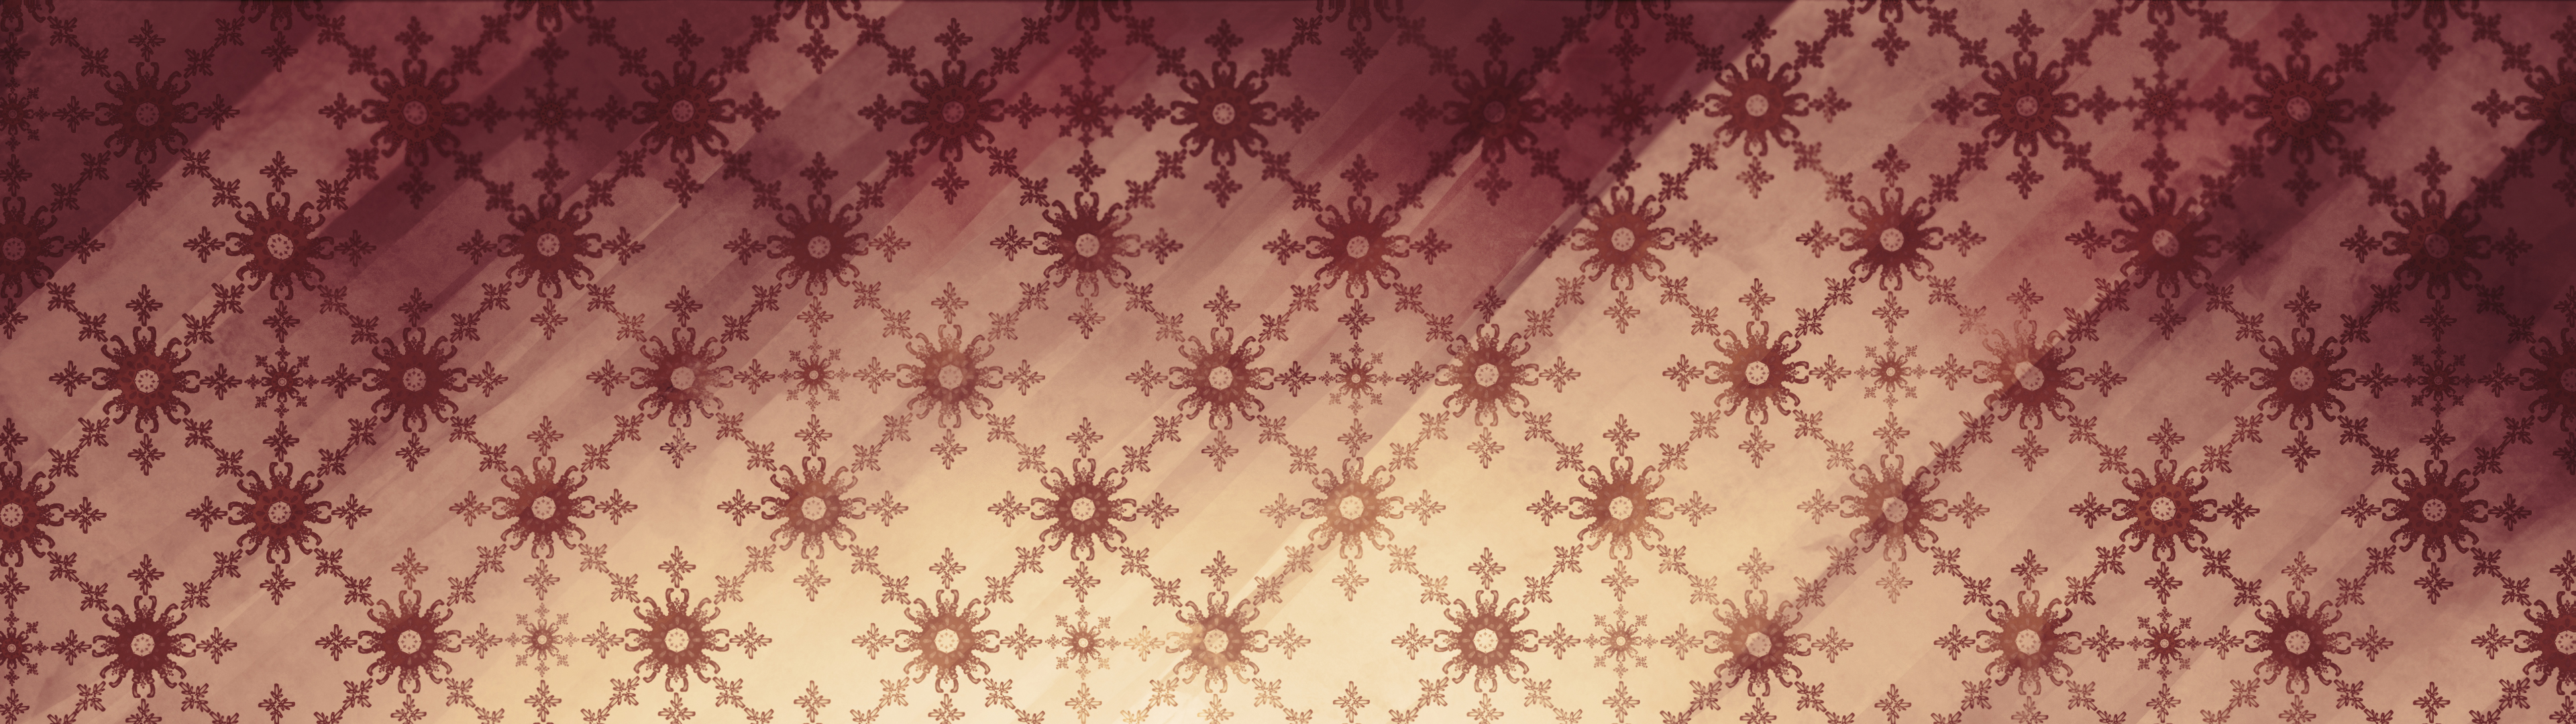 Geometry Pattern Texture Material Style 3840x1080